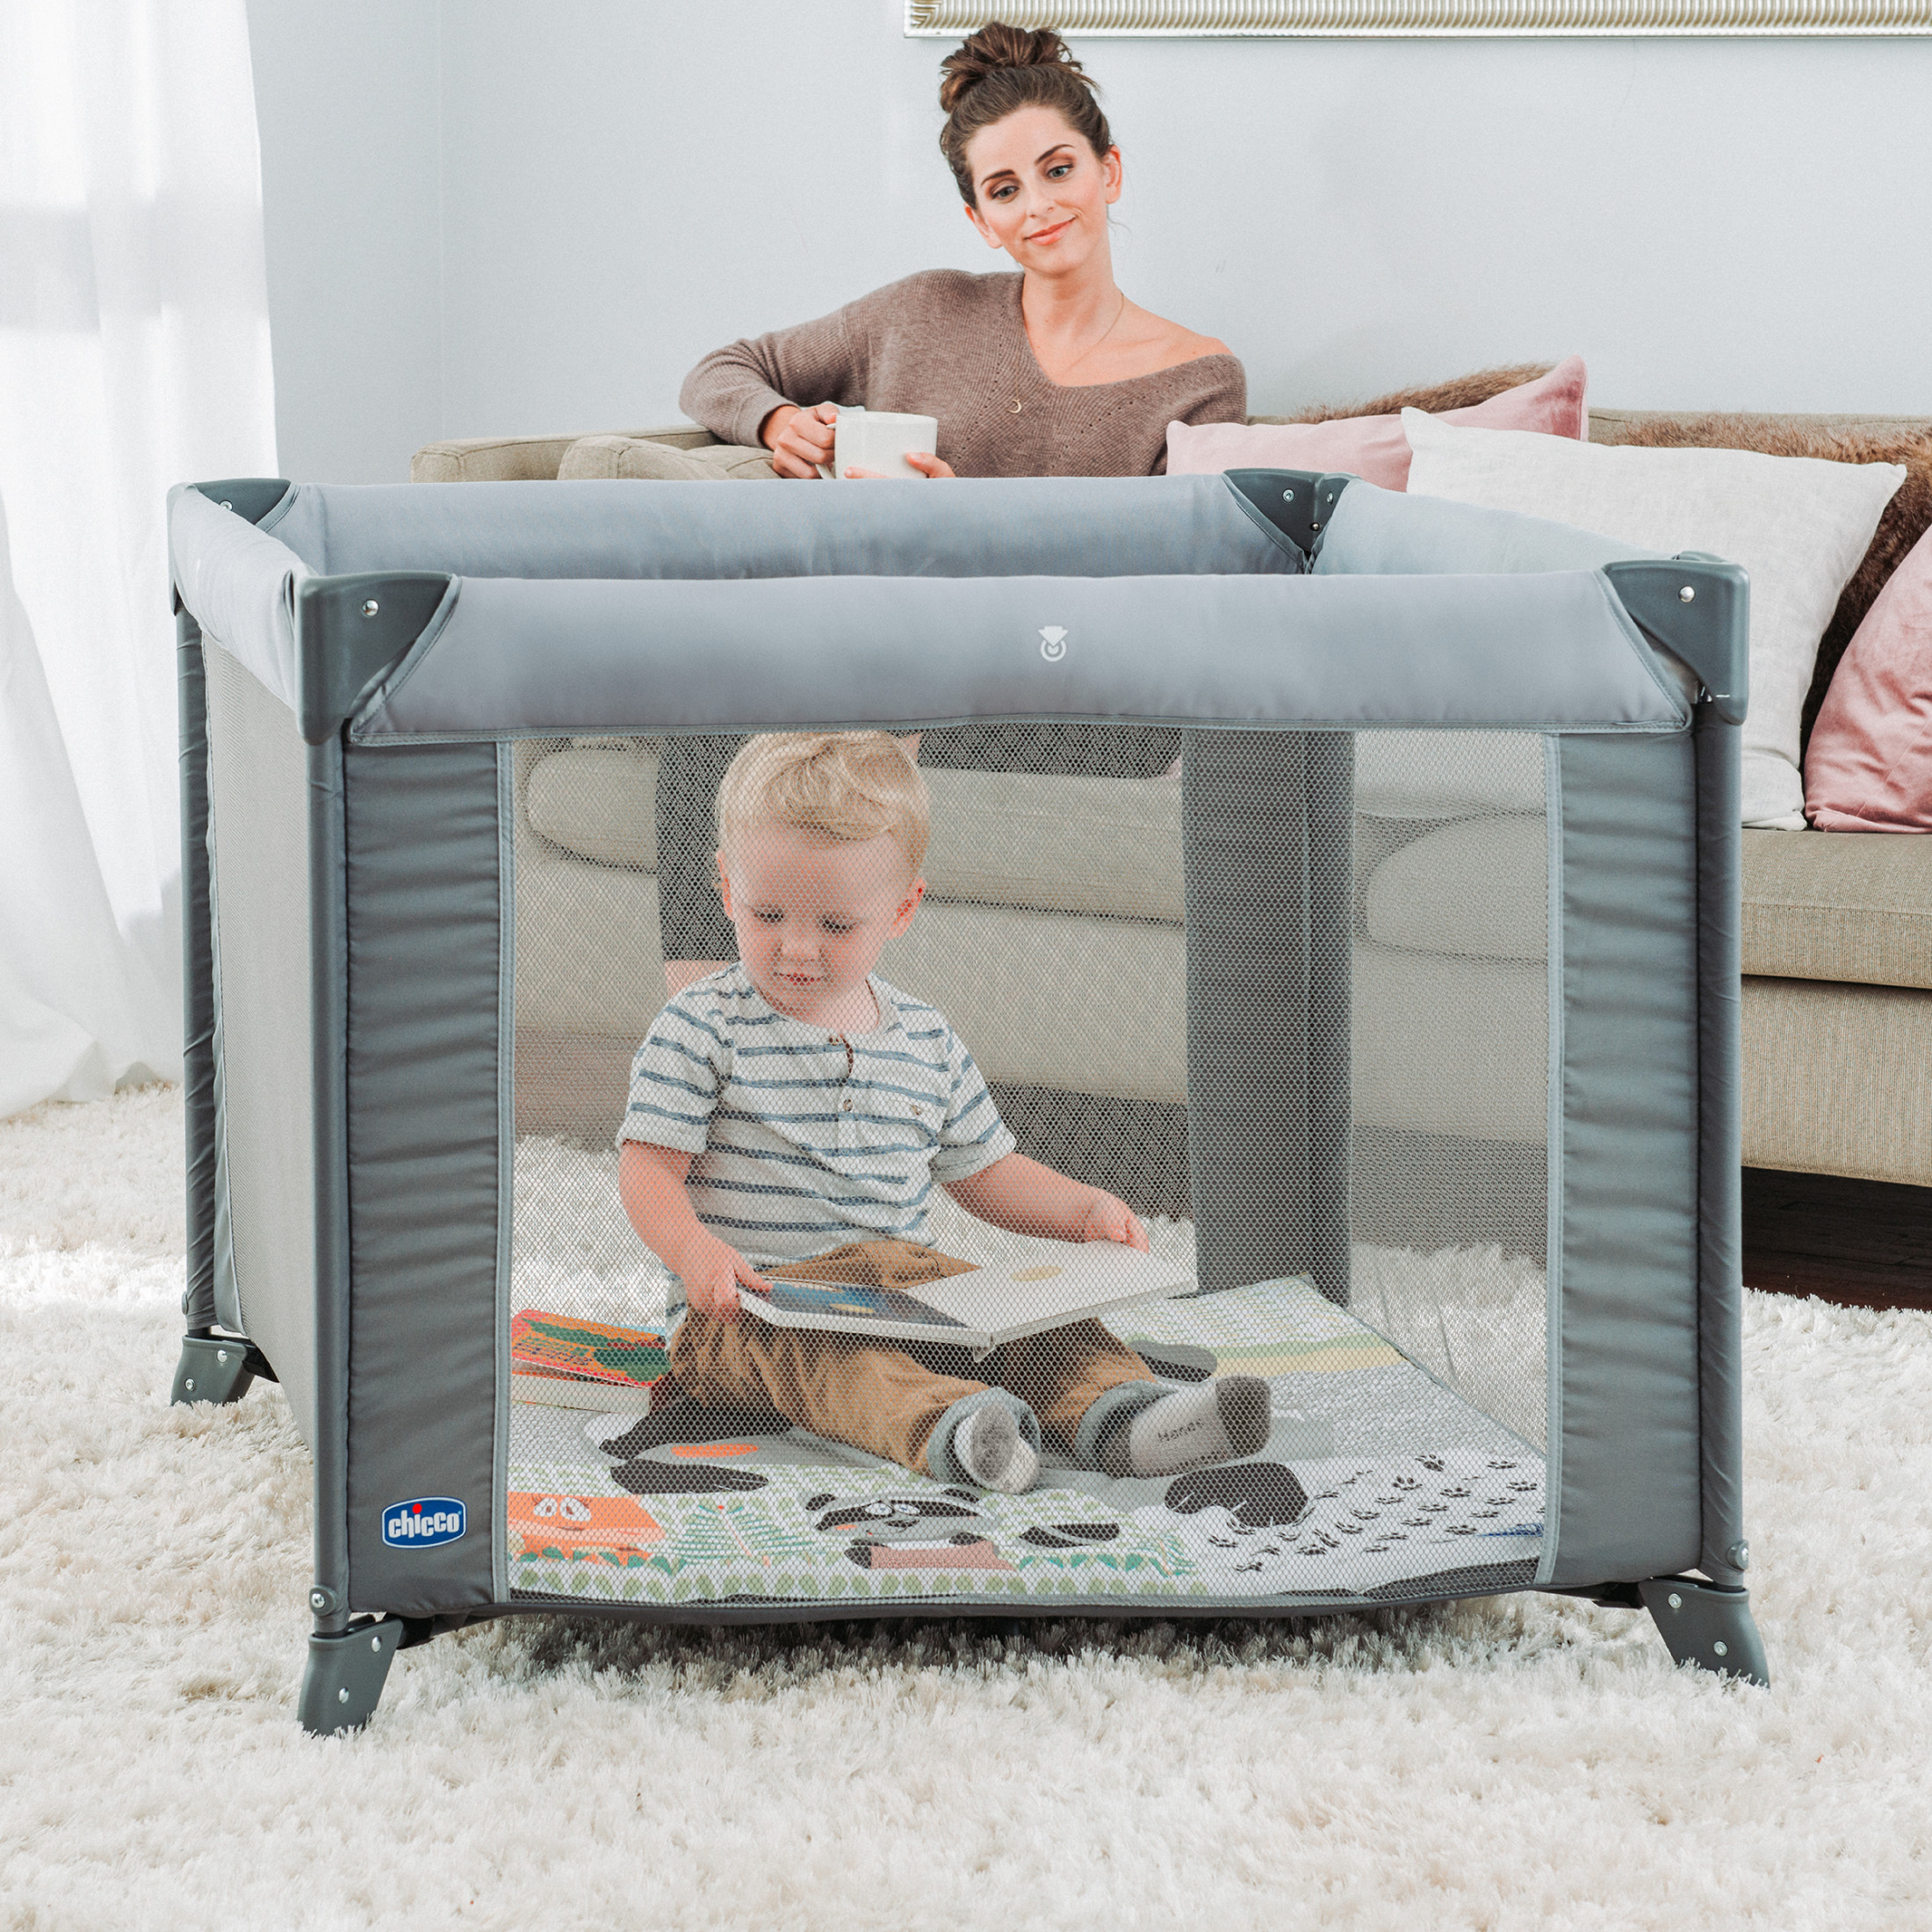 Chicco Tot Quad Portable Square Baby Playpen - Honey Bear (Grey) - image 2 of 7